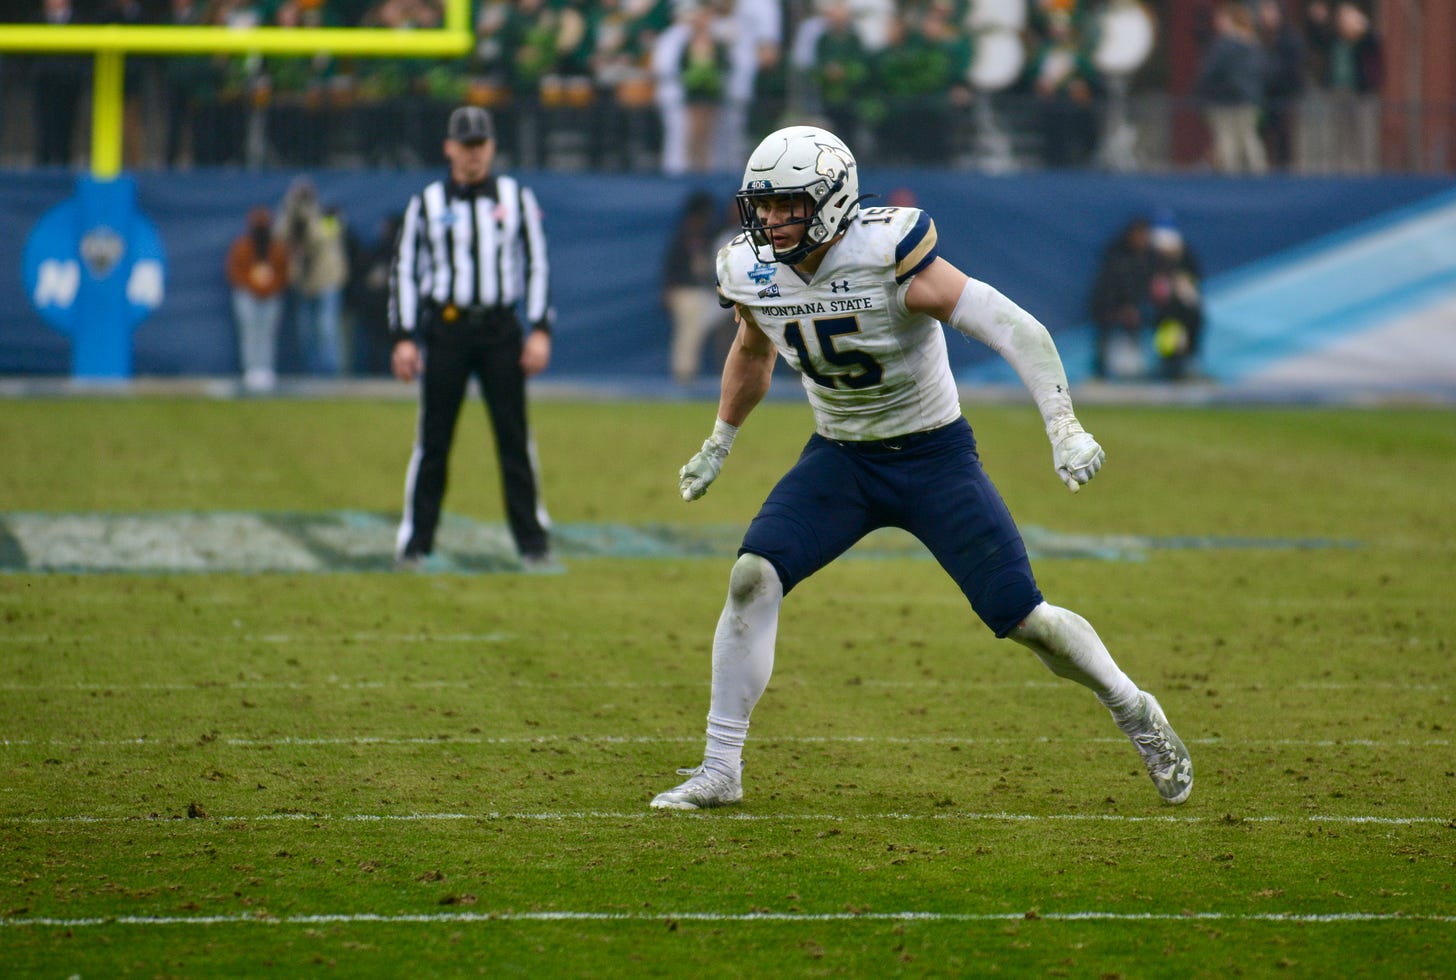 Montana State's Troy Andersen invited to NFL Combine